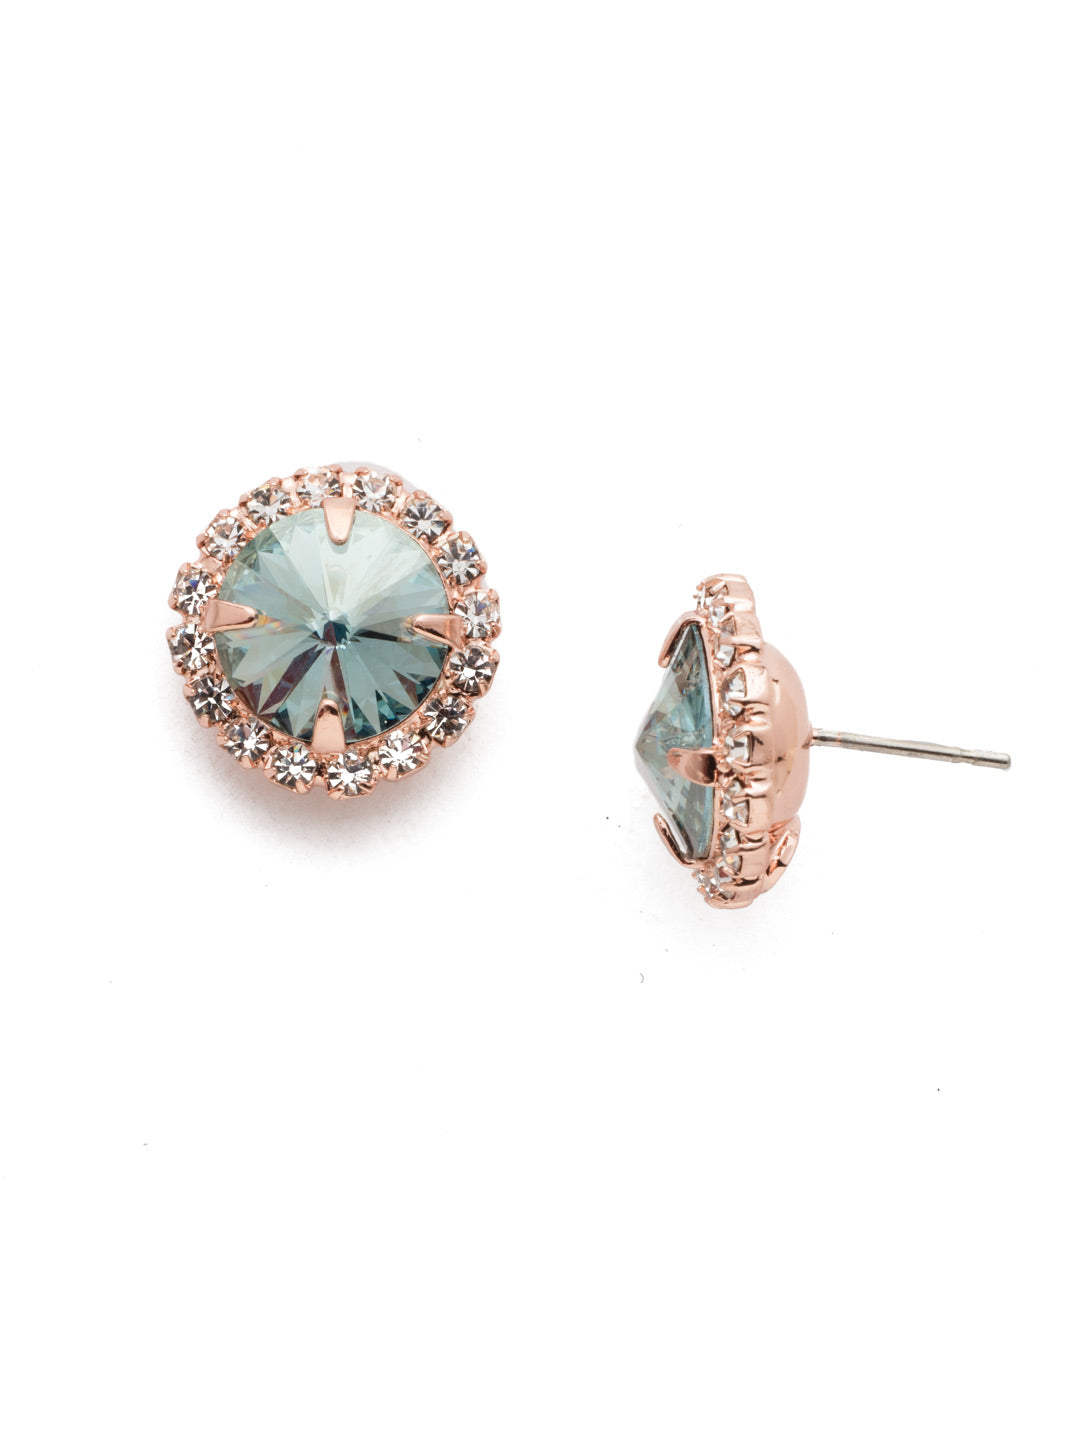 Haute Halo Stud Earring - ECX98RGCAZ - A central round crystal with an elegant halo of gems embodies elegance and style. From Sorrelli's Crystal Azure collection in our Rose Gold-tone finish.